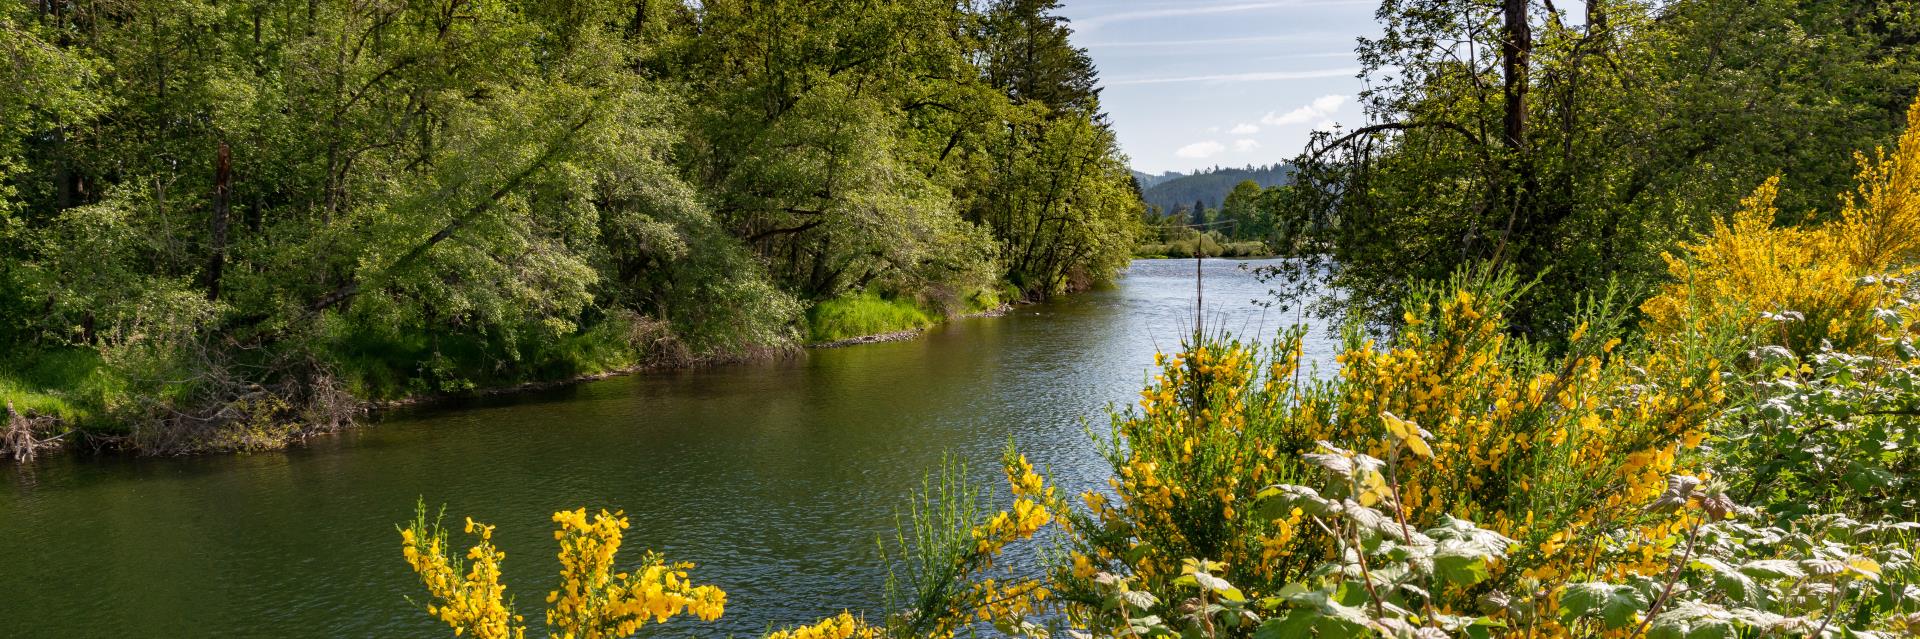 North Santiam River with Flowers